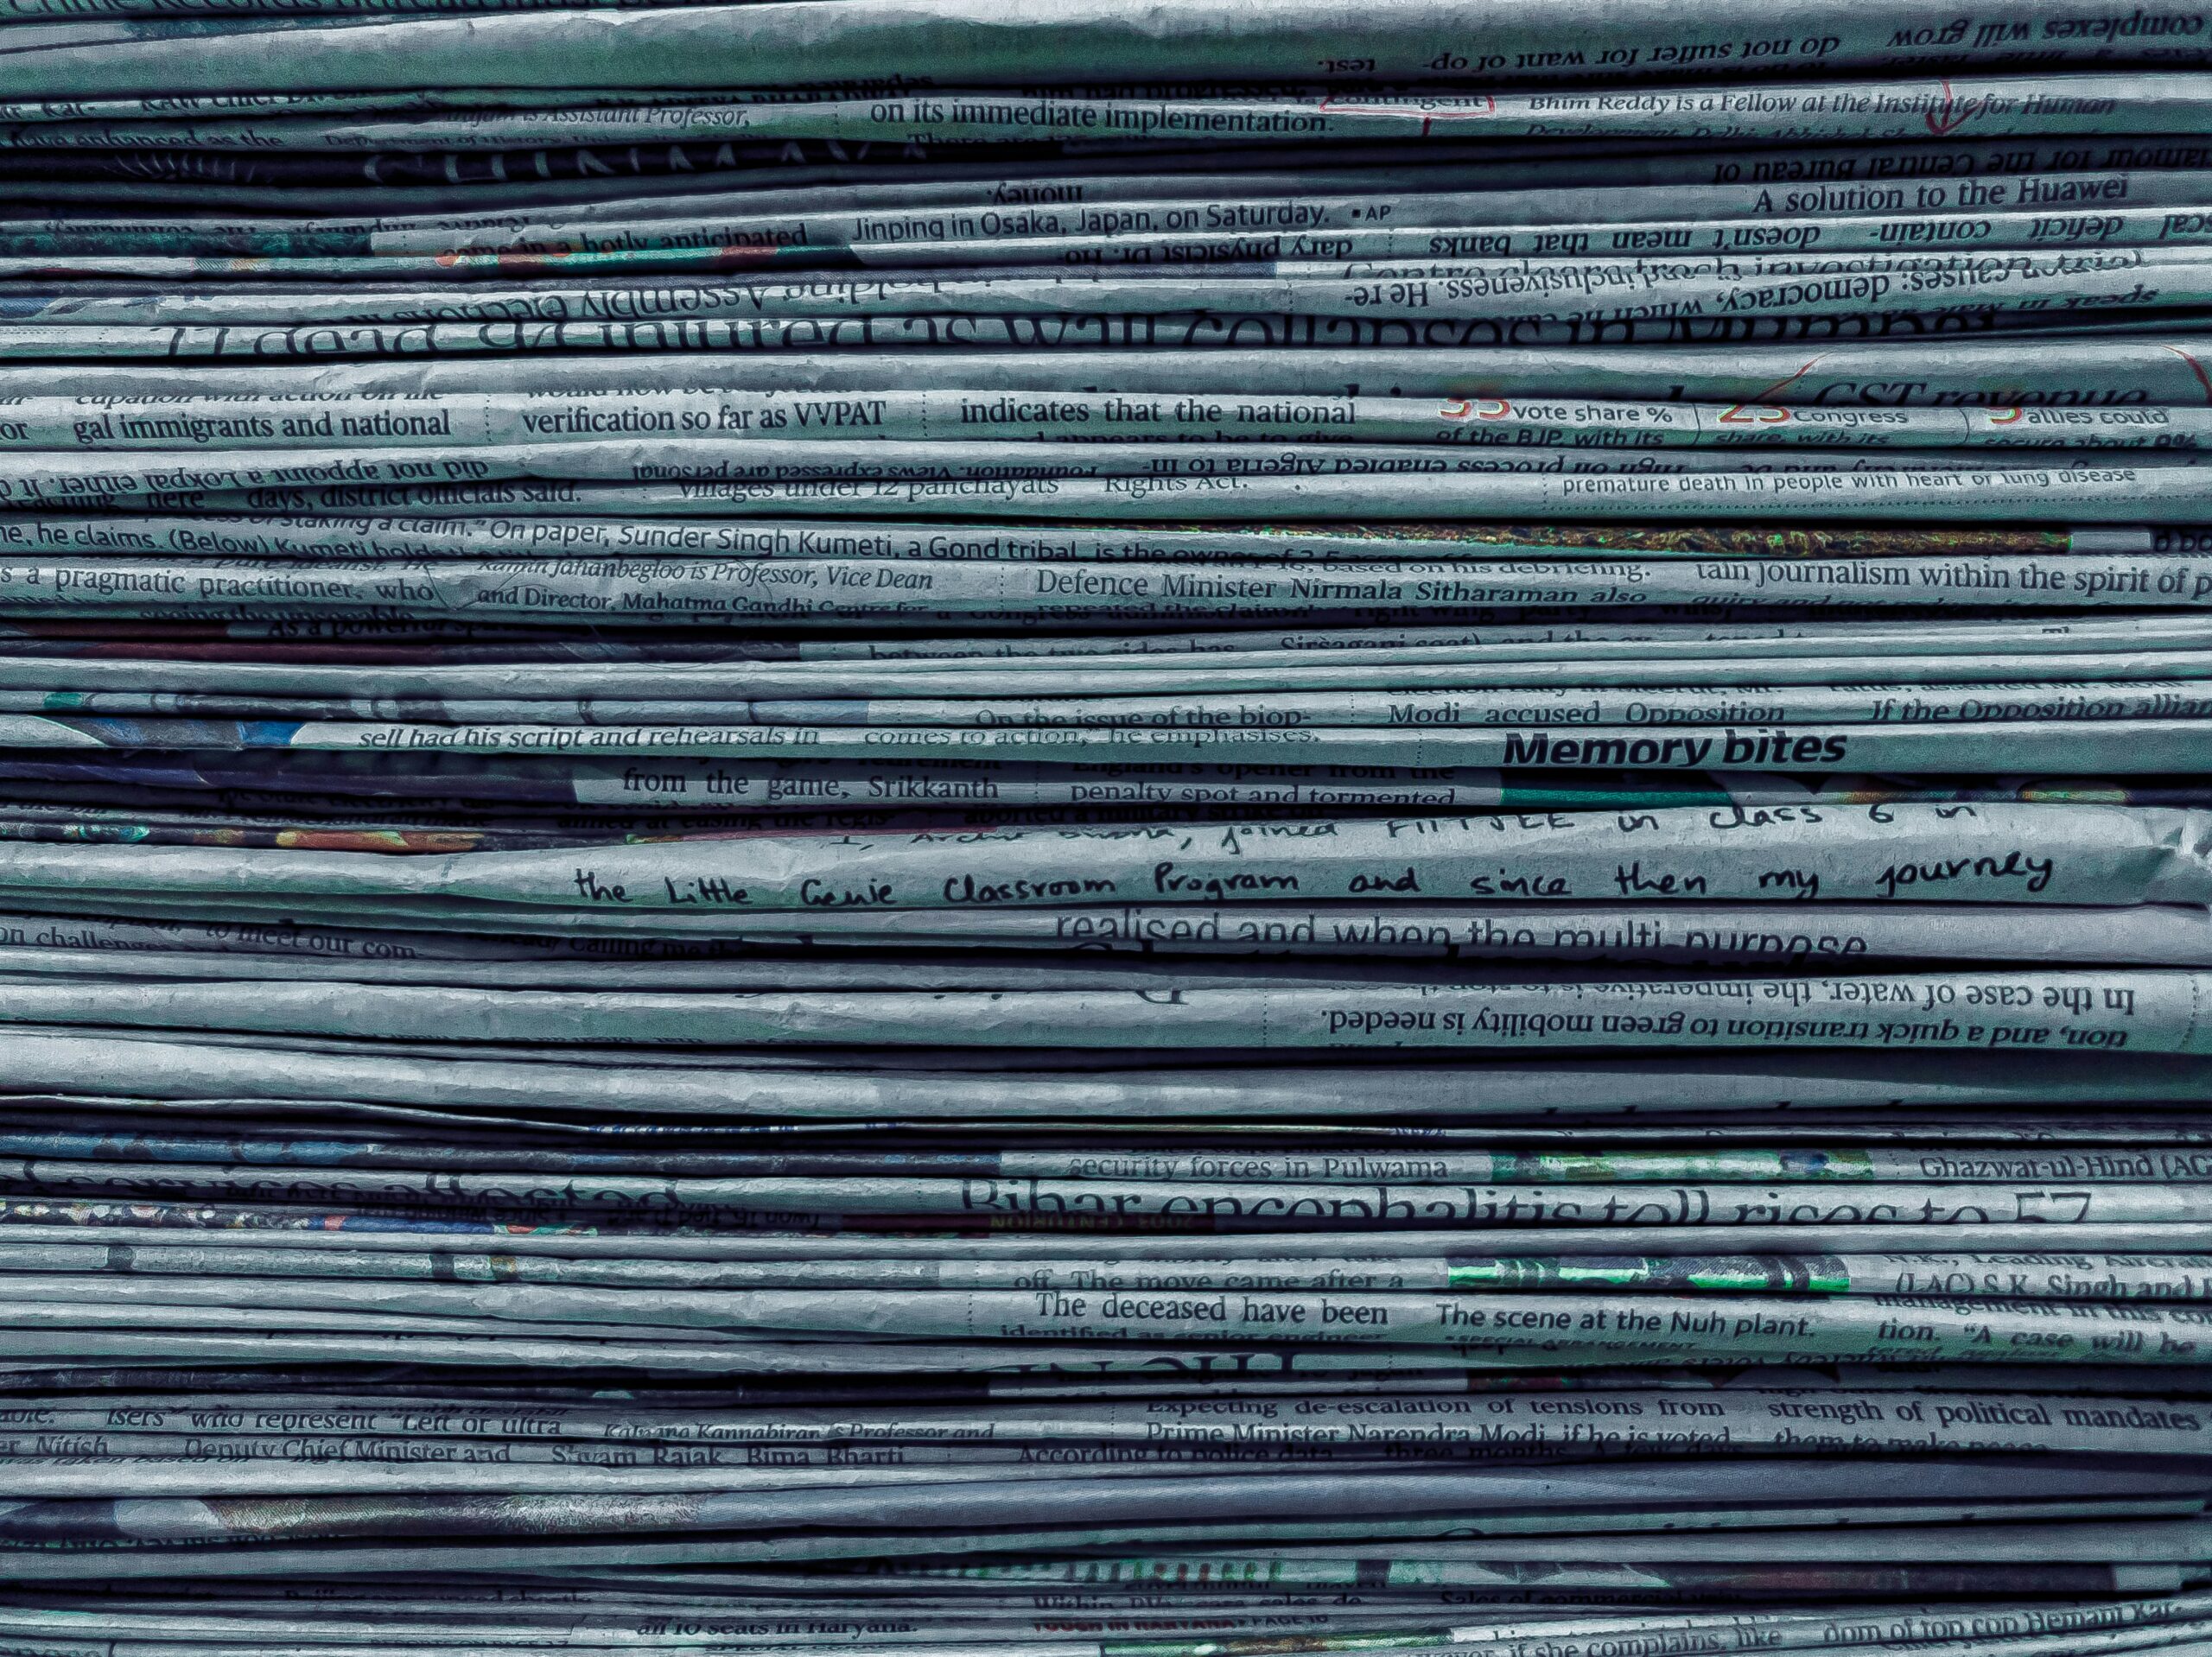 A close up of a large stack of newspapers.